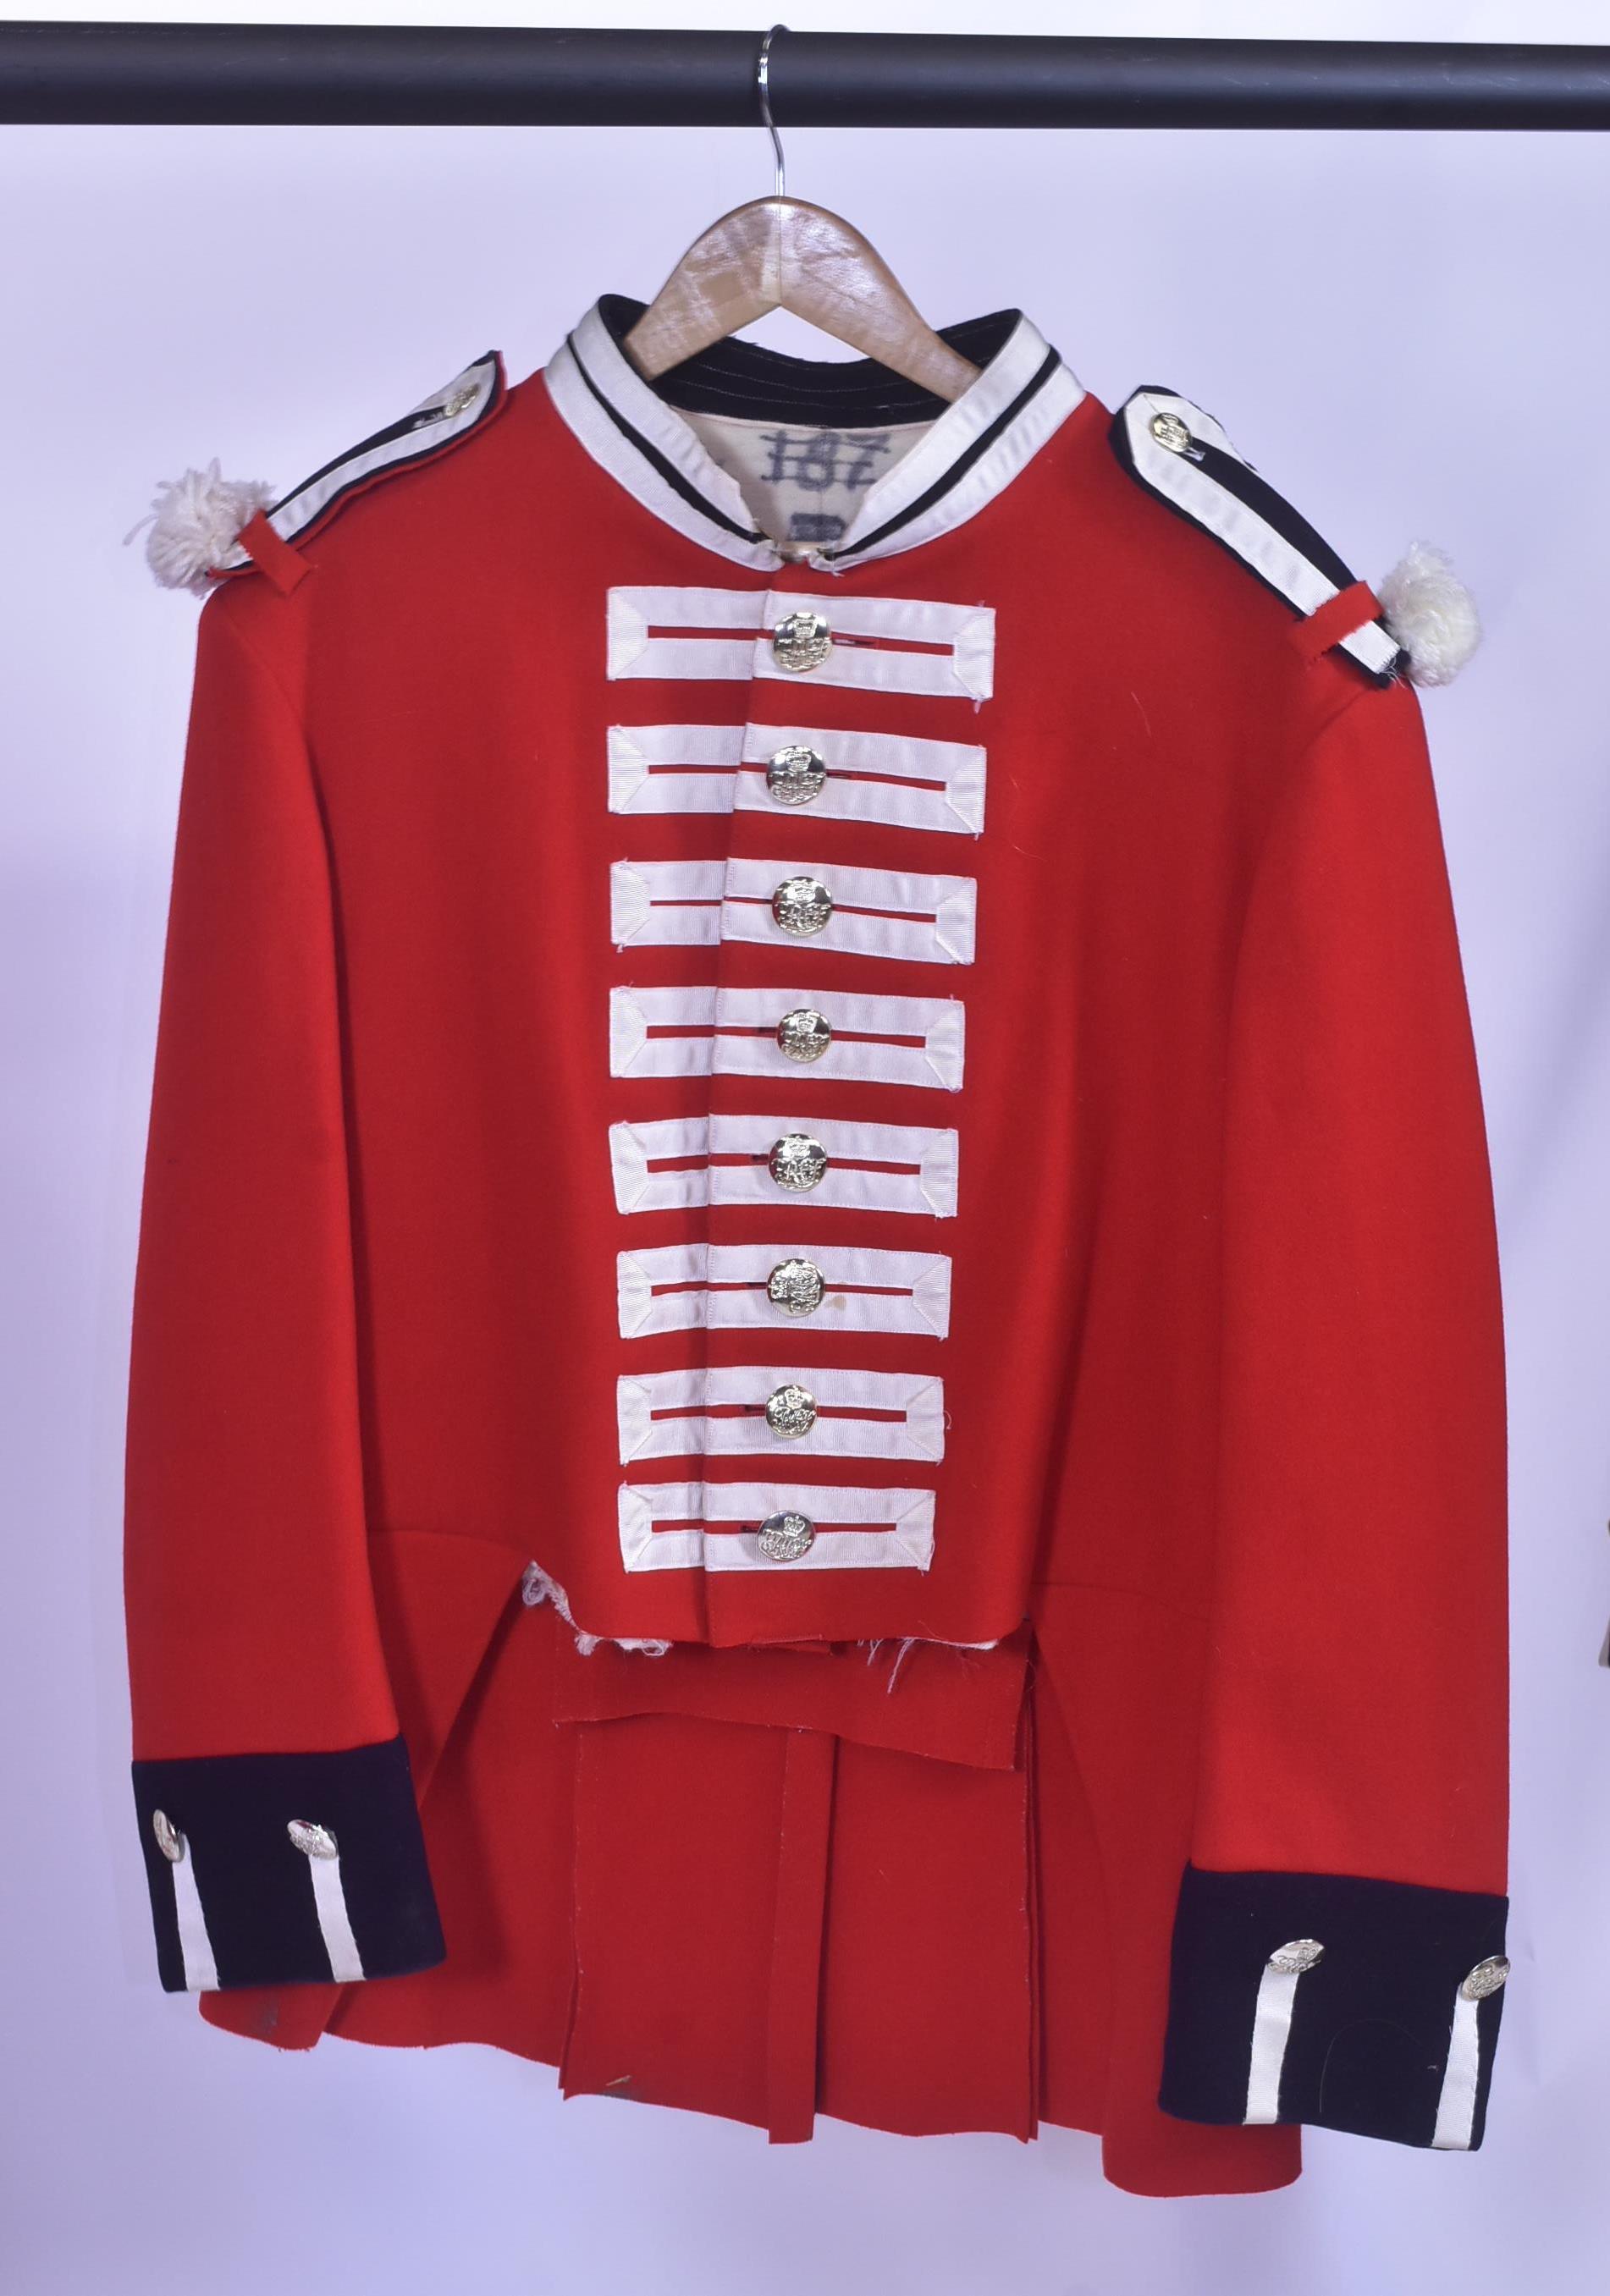 CHELSEA PENSIONERS NAPOLEONIC STYLE REPRODUCTION UNIFORM - Image 4 of 6